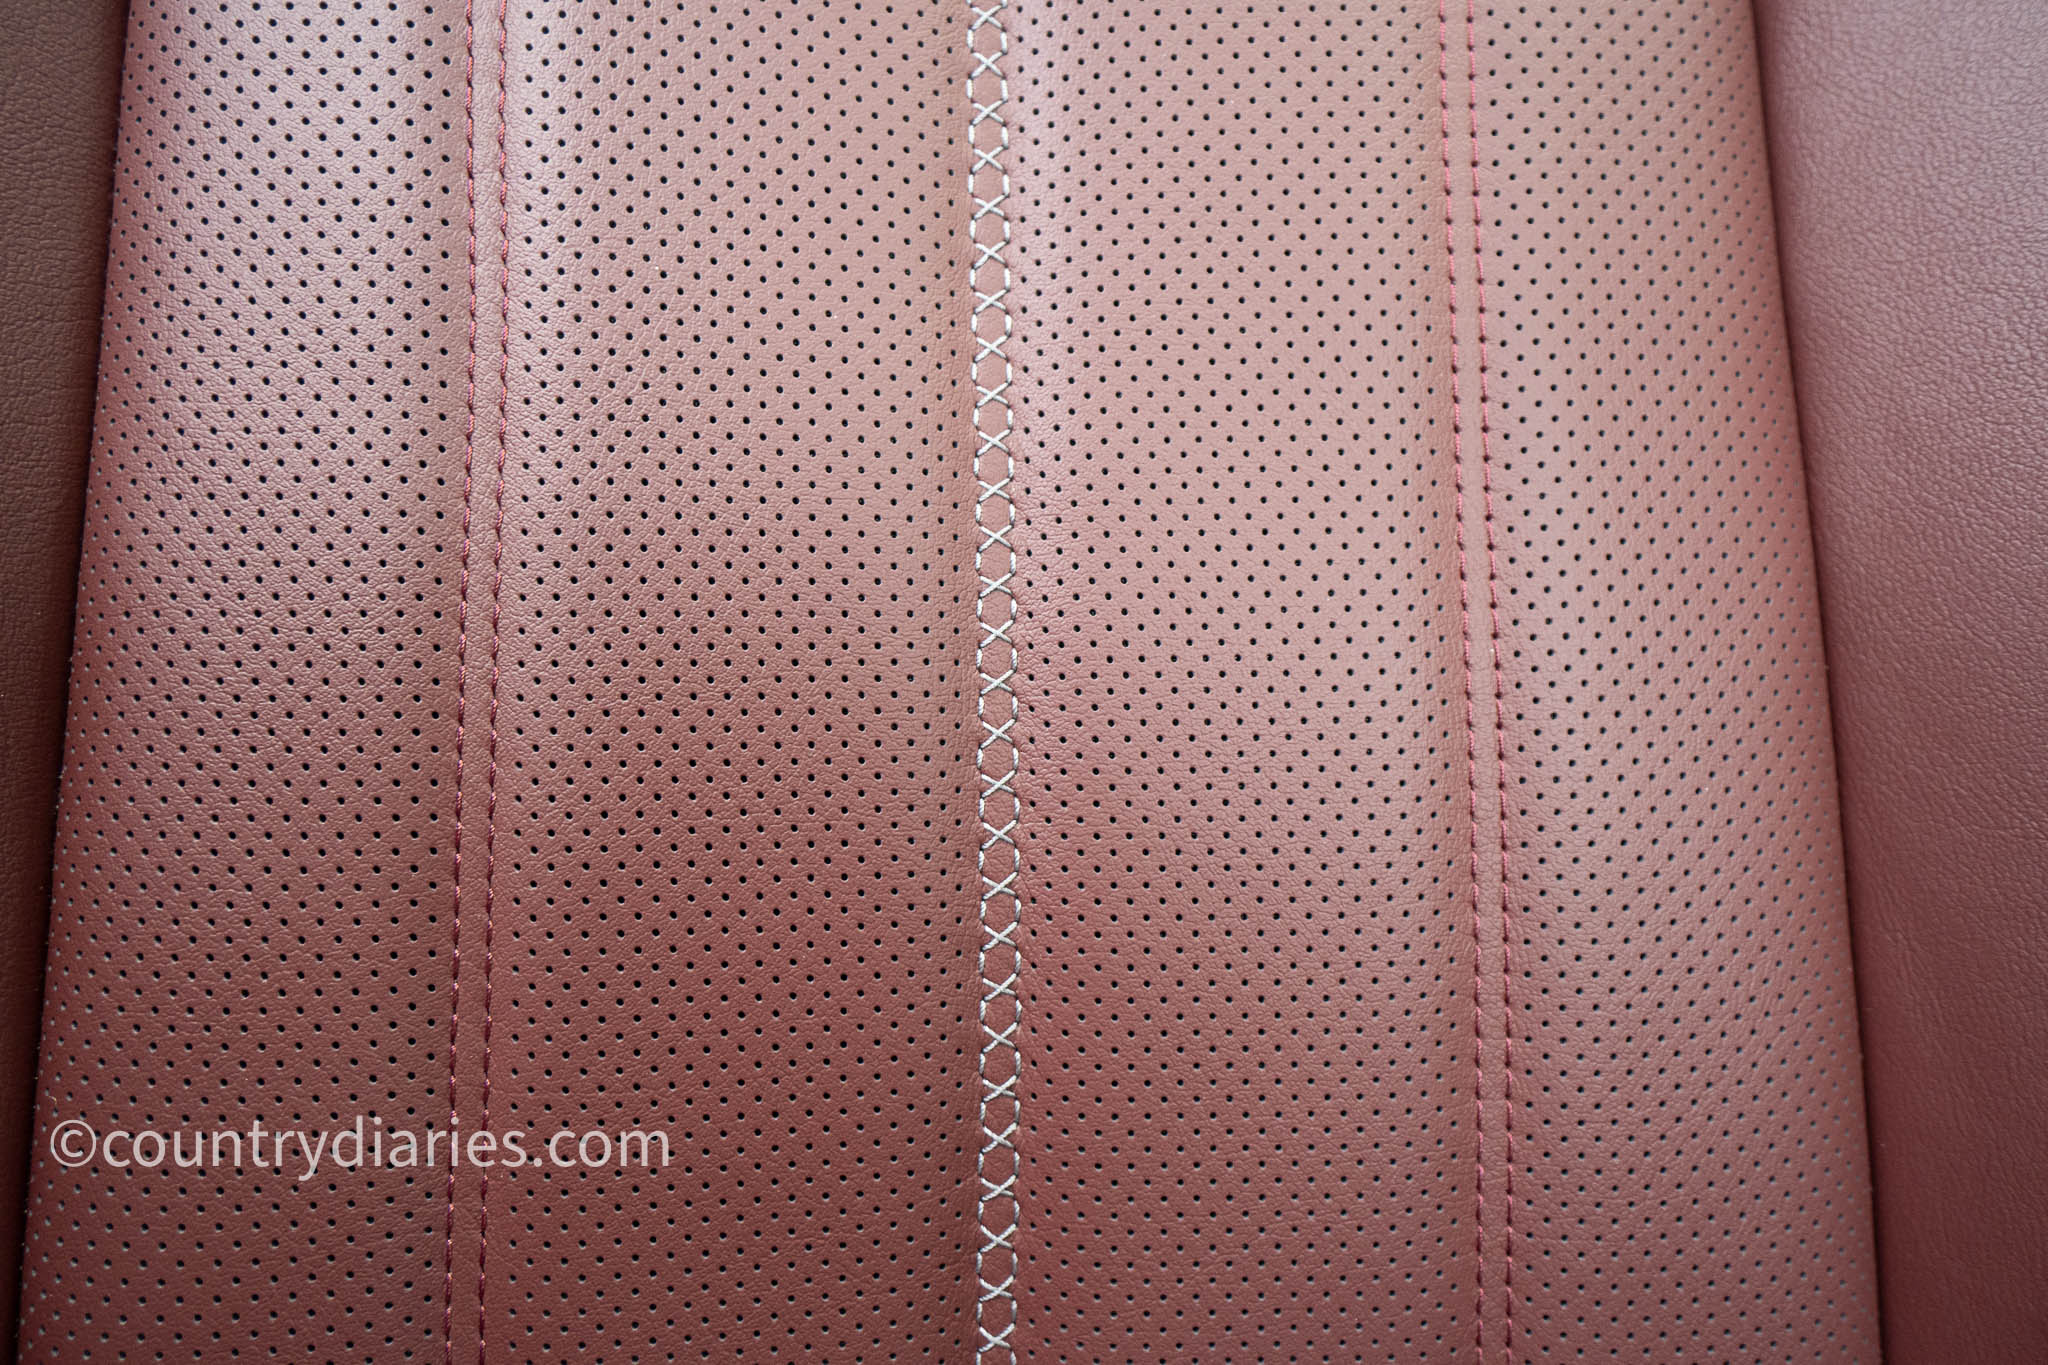 leather car seat with perforated holes